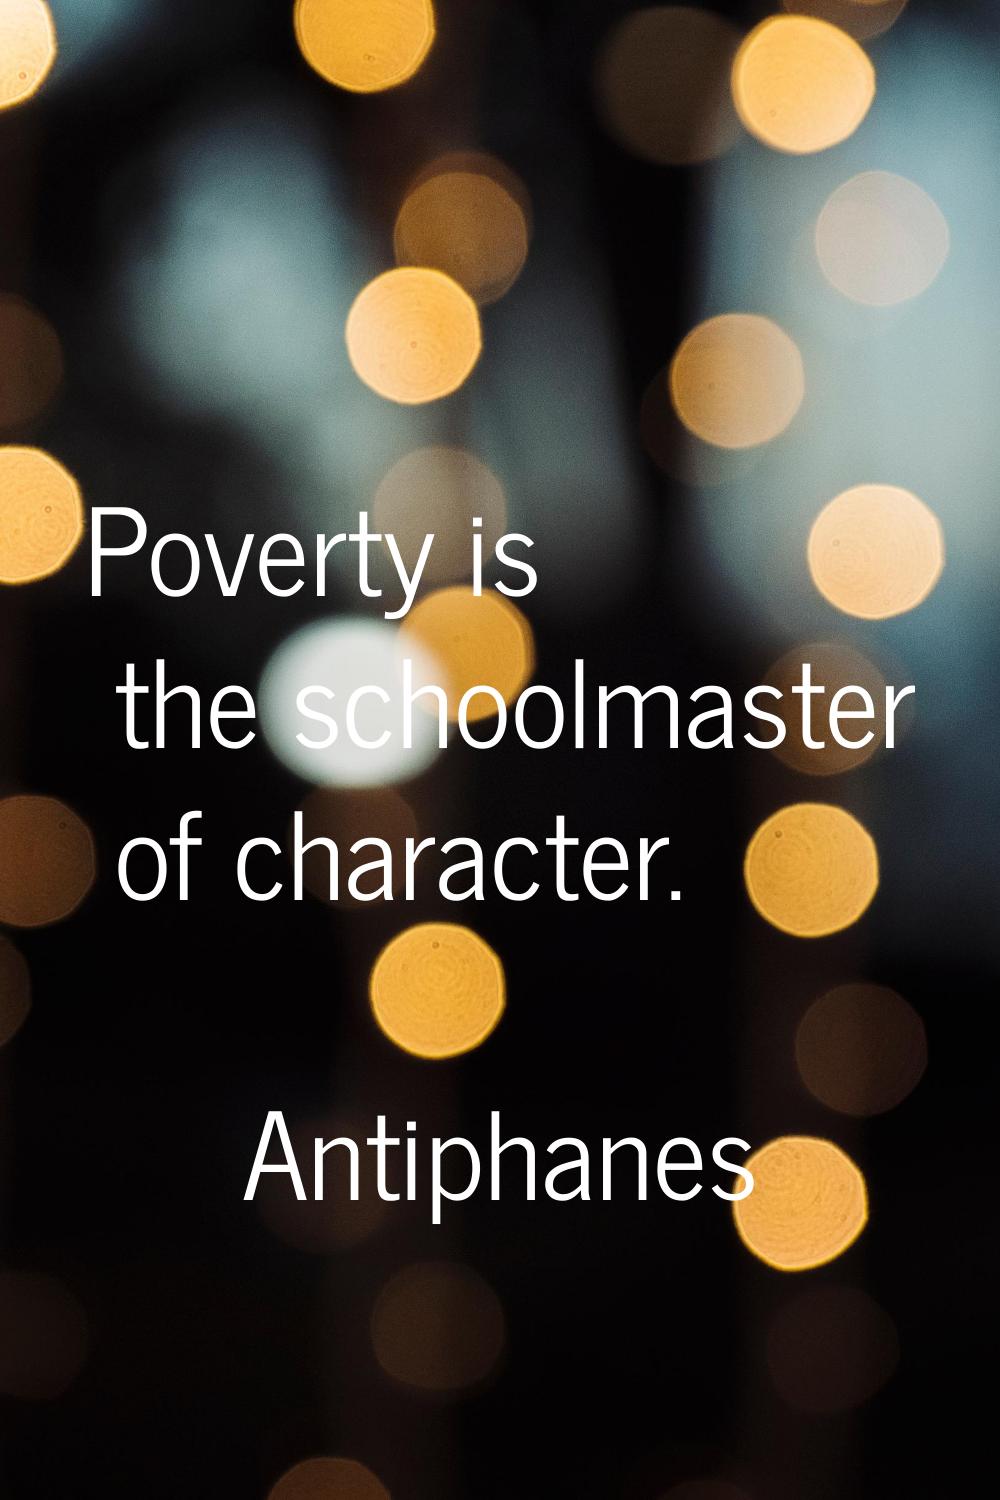 Poverty is the schoolmaster of character.